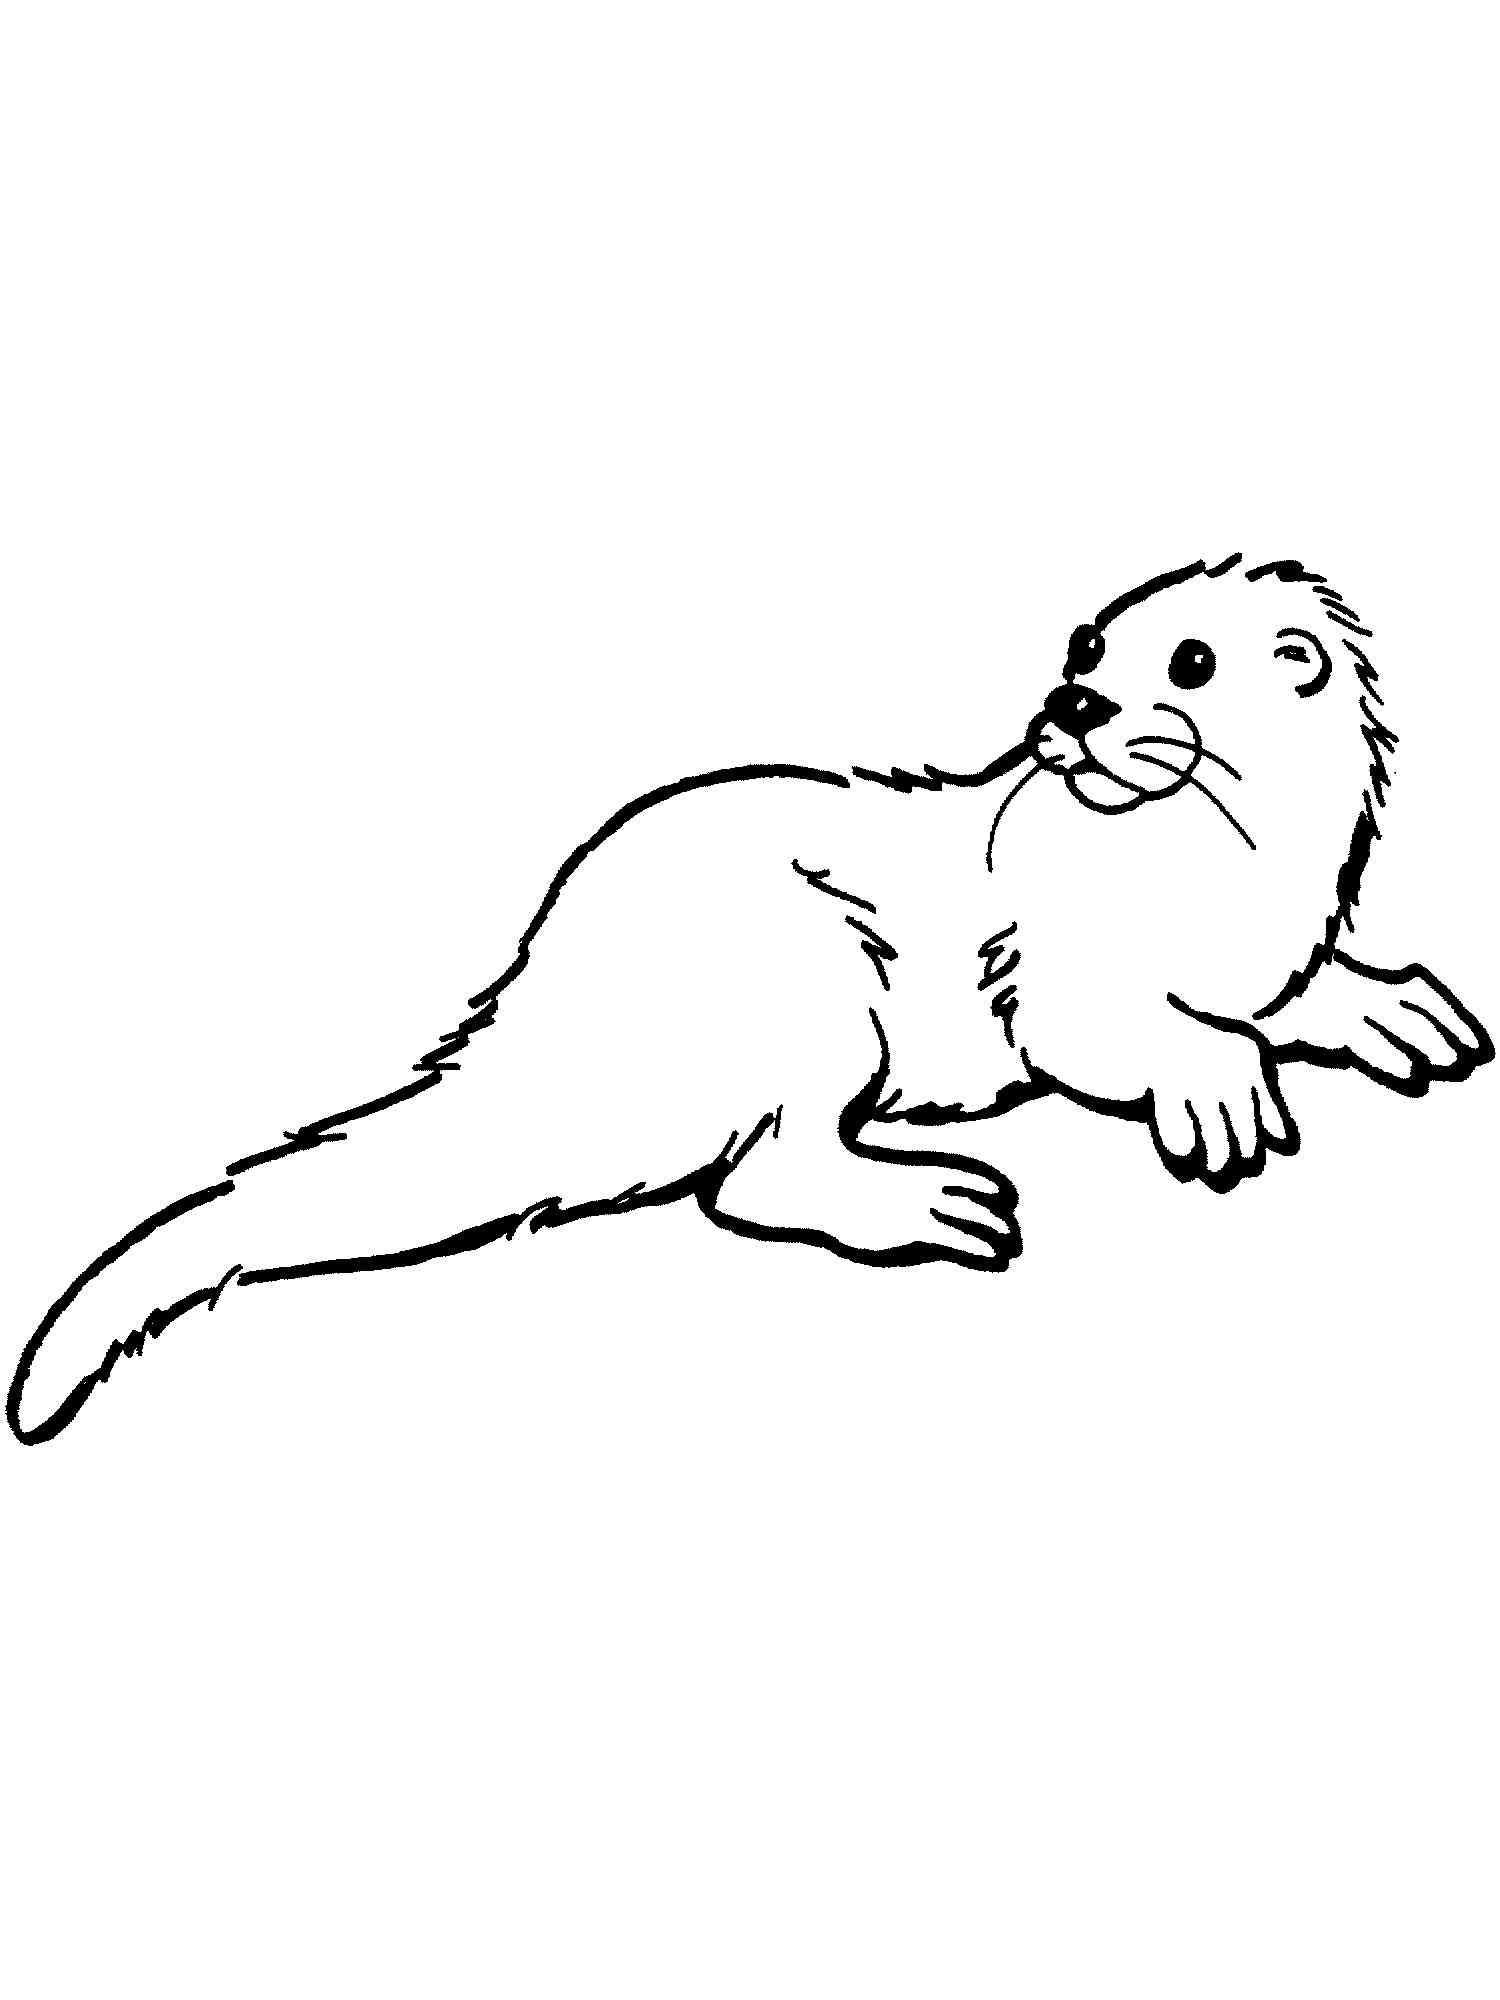 Eurasian Otter coloring page